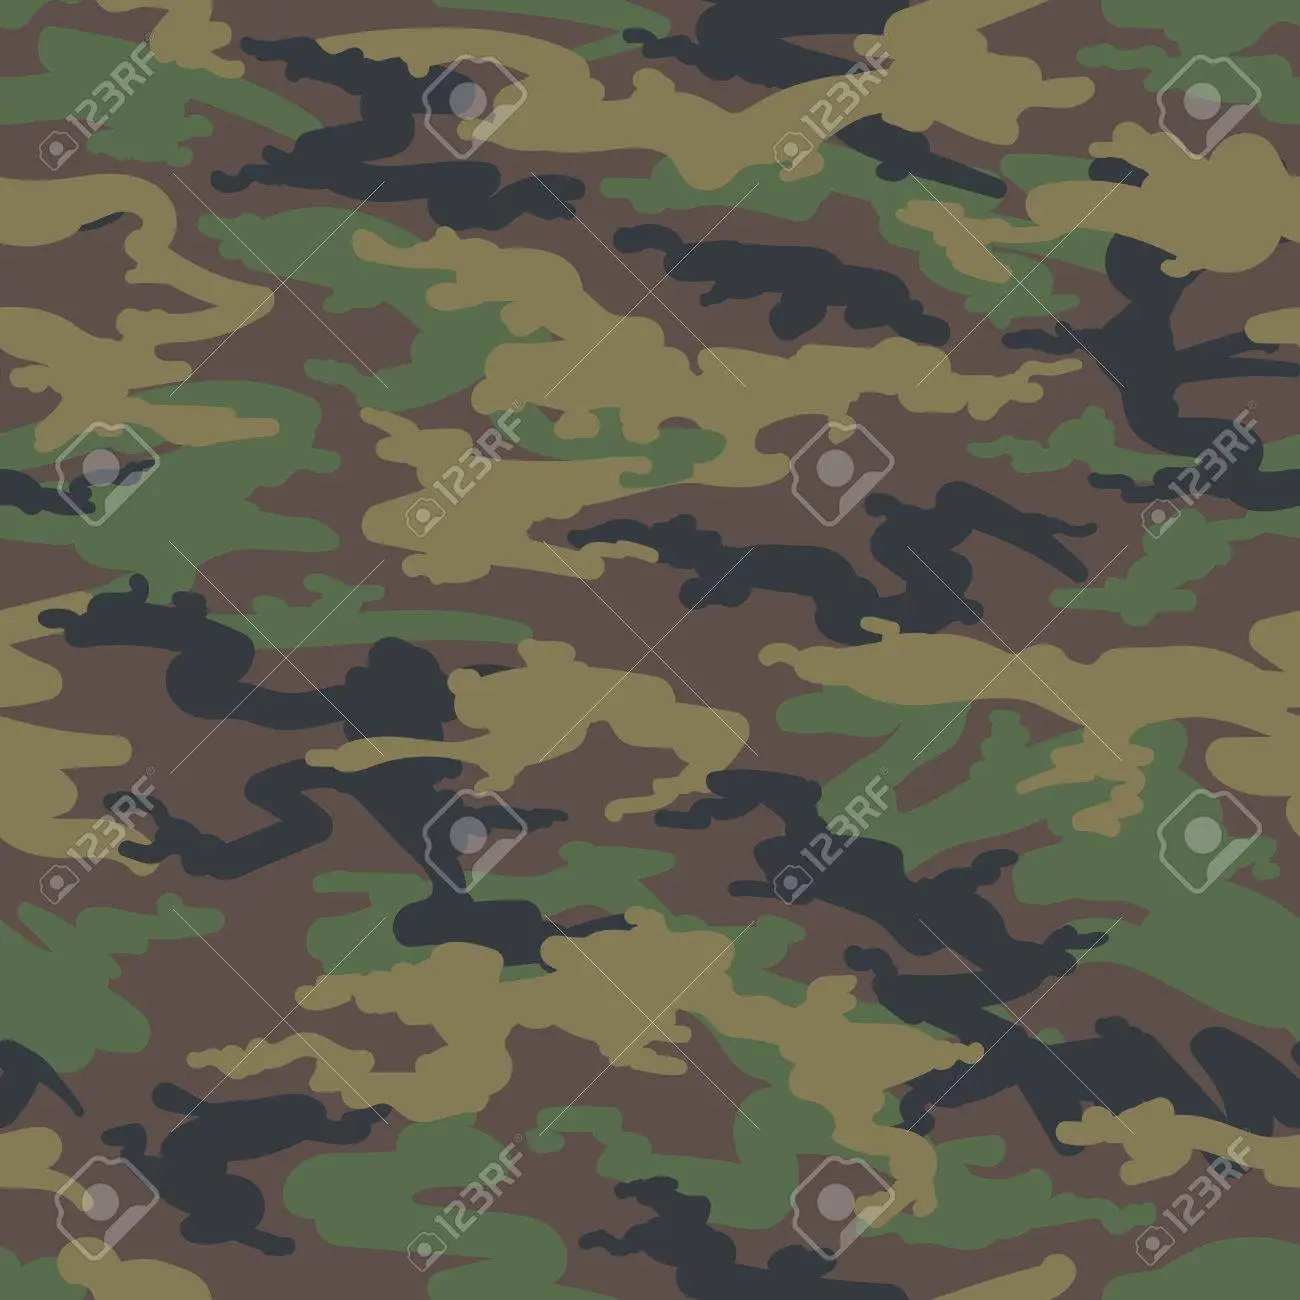 Military army camo background vector woodland hunting camoflauge seamless pattern royalty free svg cliparts vectors and stock illustration image